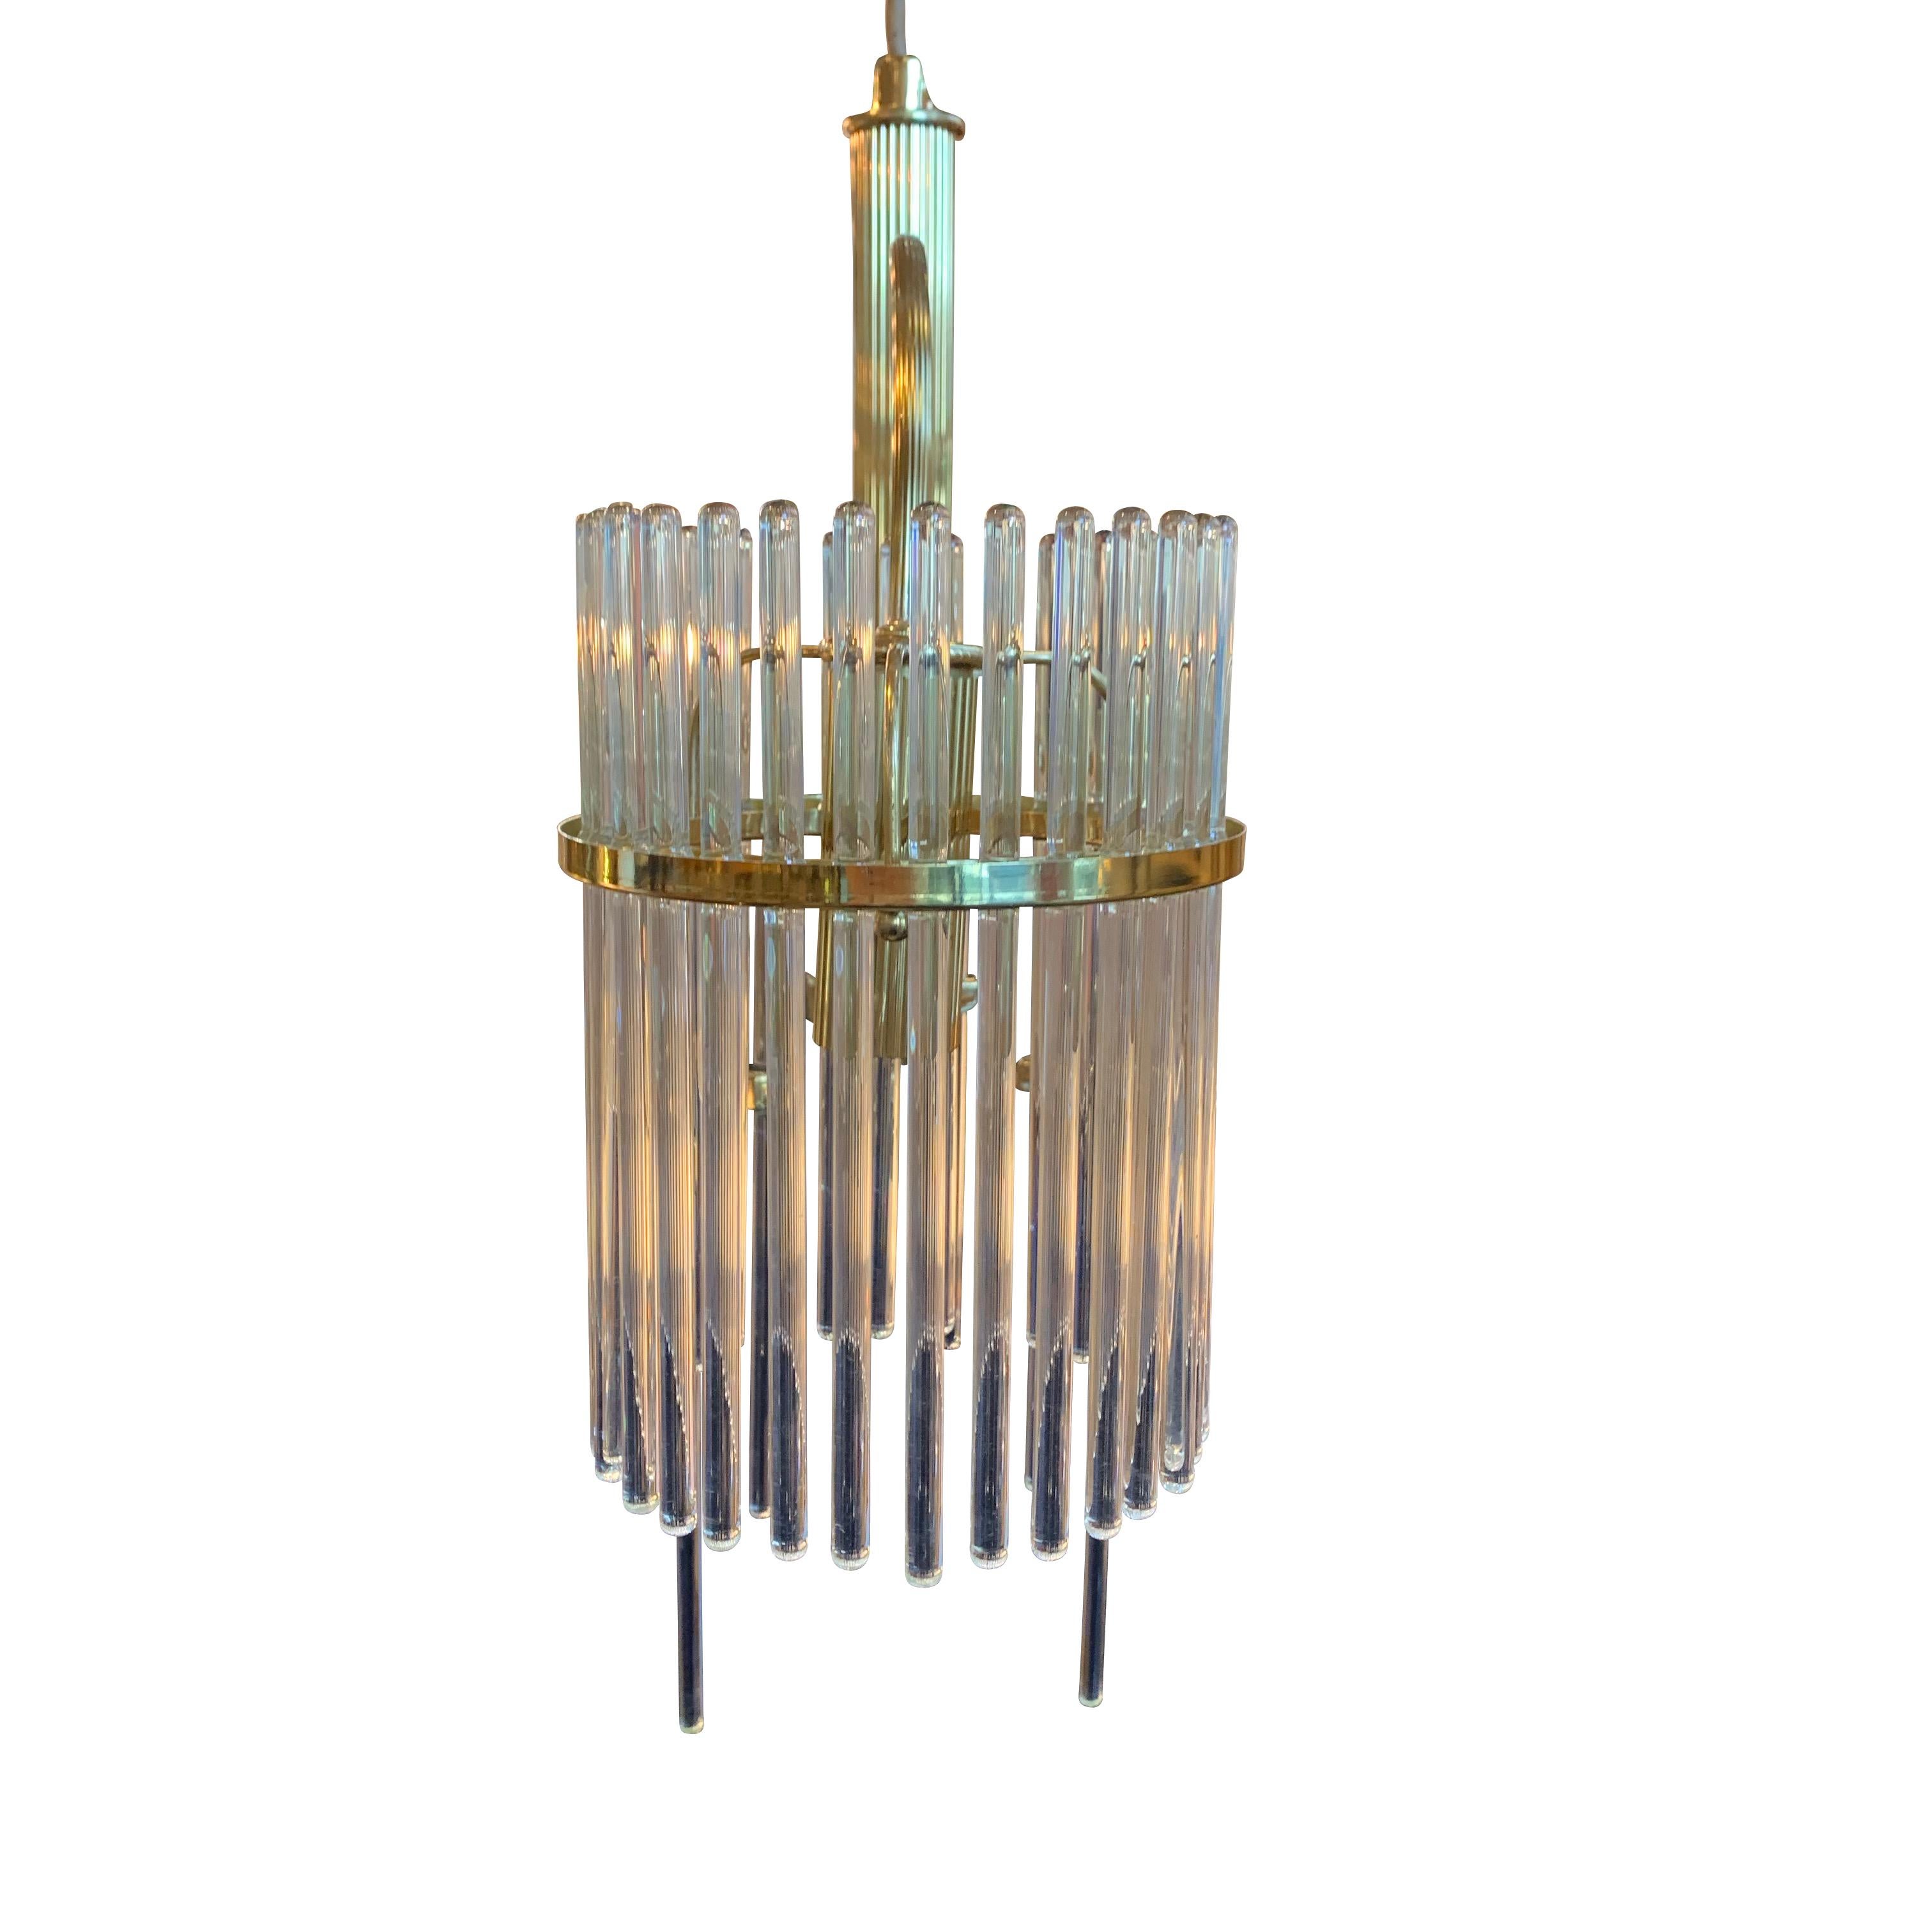 Italian design Sciolari three-arm chandelier
The signature thin crystal rods circle a brass ring on each arm.
Five decorative brass arms are decorative and hold additional crystal rods.
The vertically ribbed center brass rod has a single bulb at